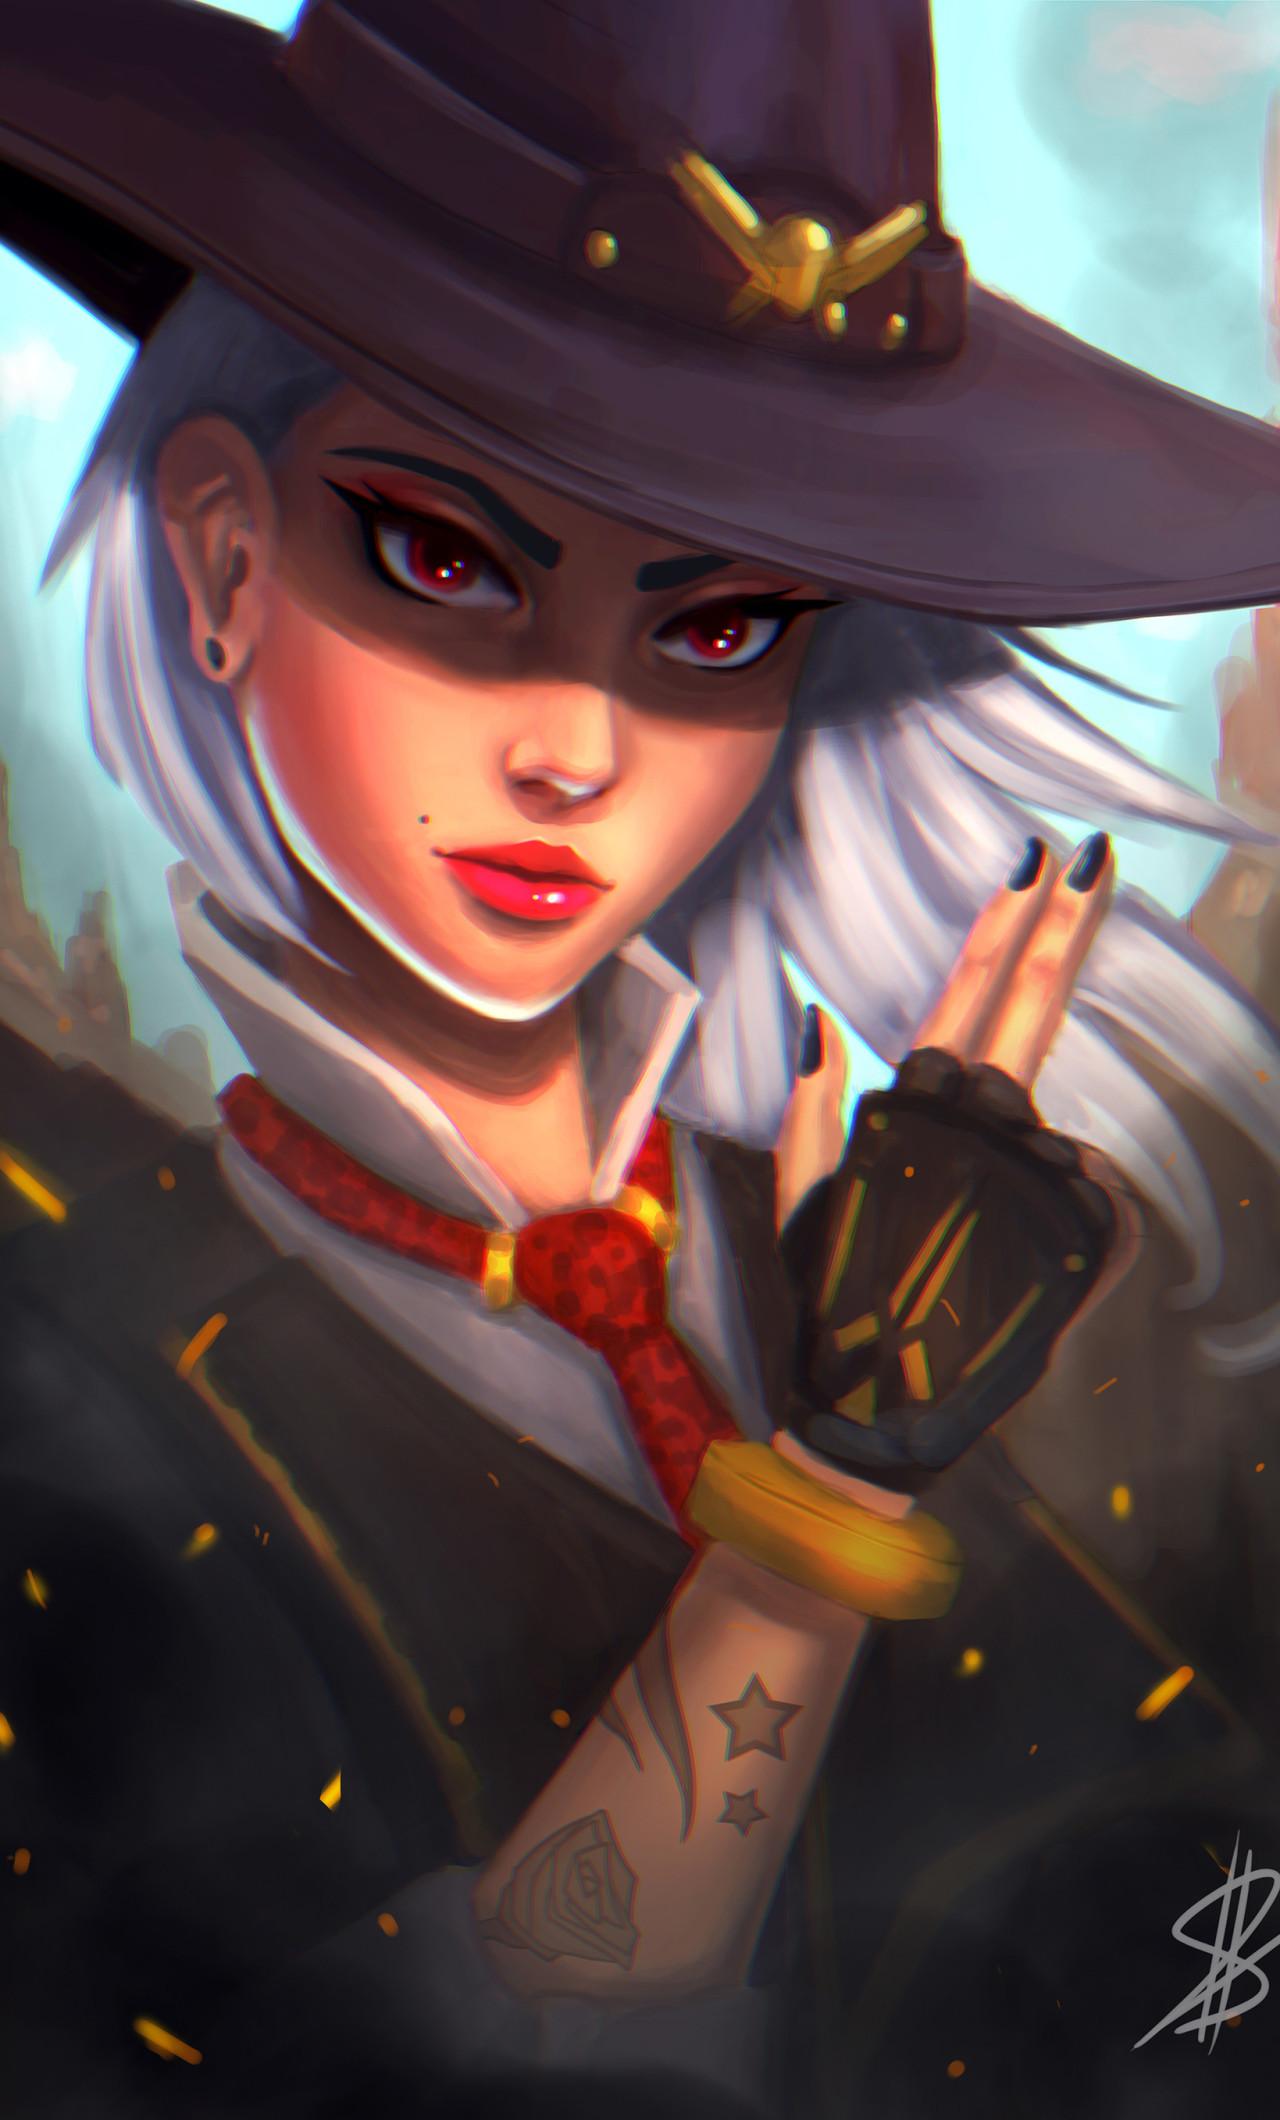 Overwatch Ashe Phone Wallpapers - Wallpaper Cave